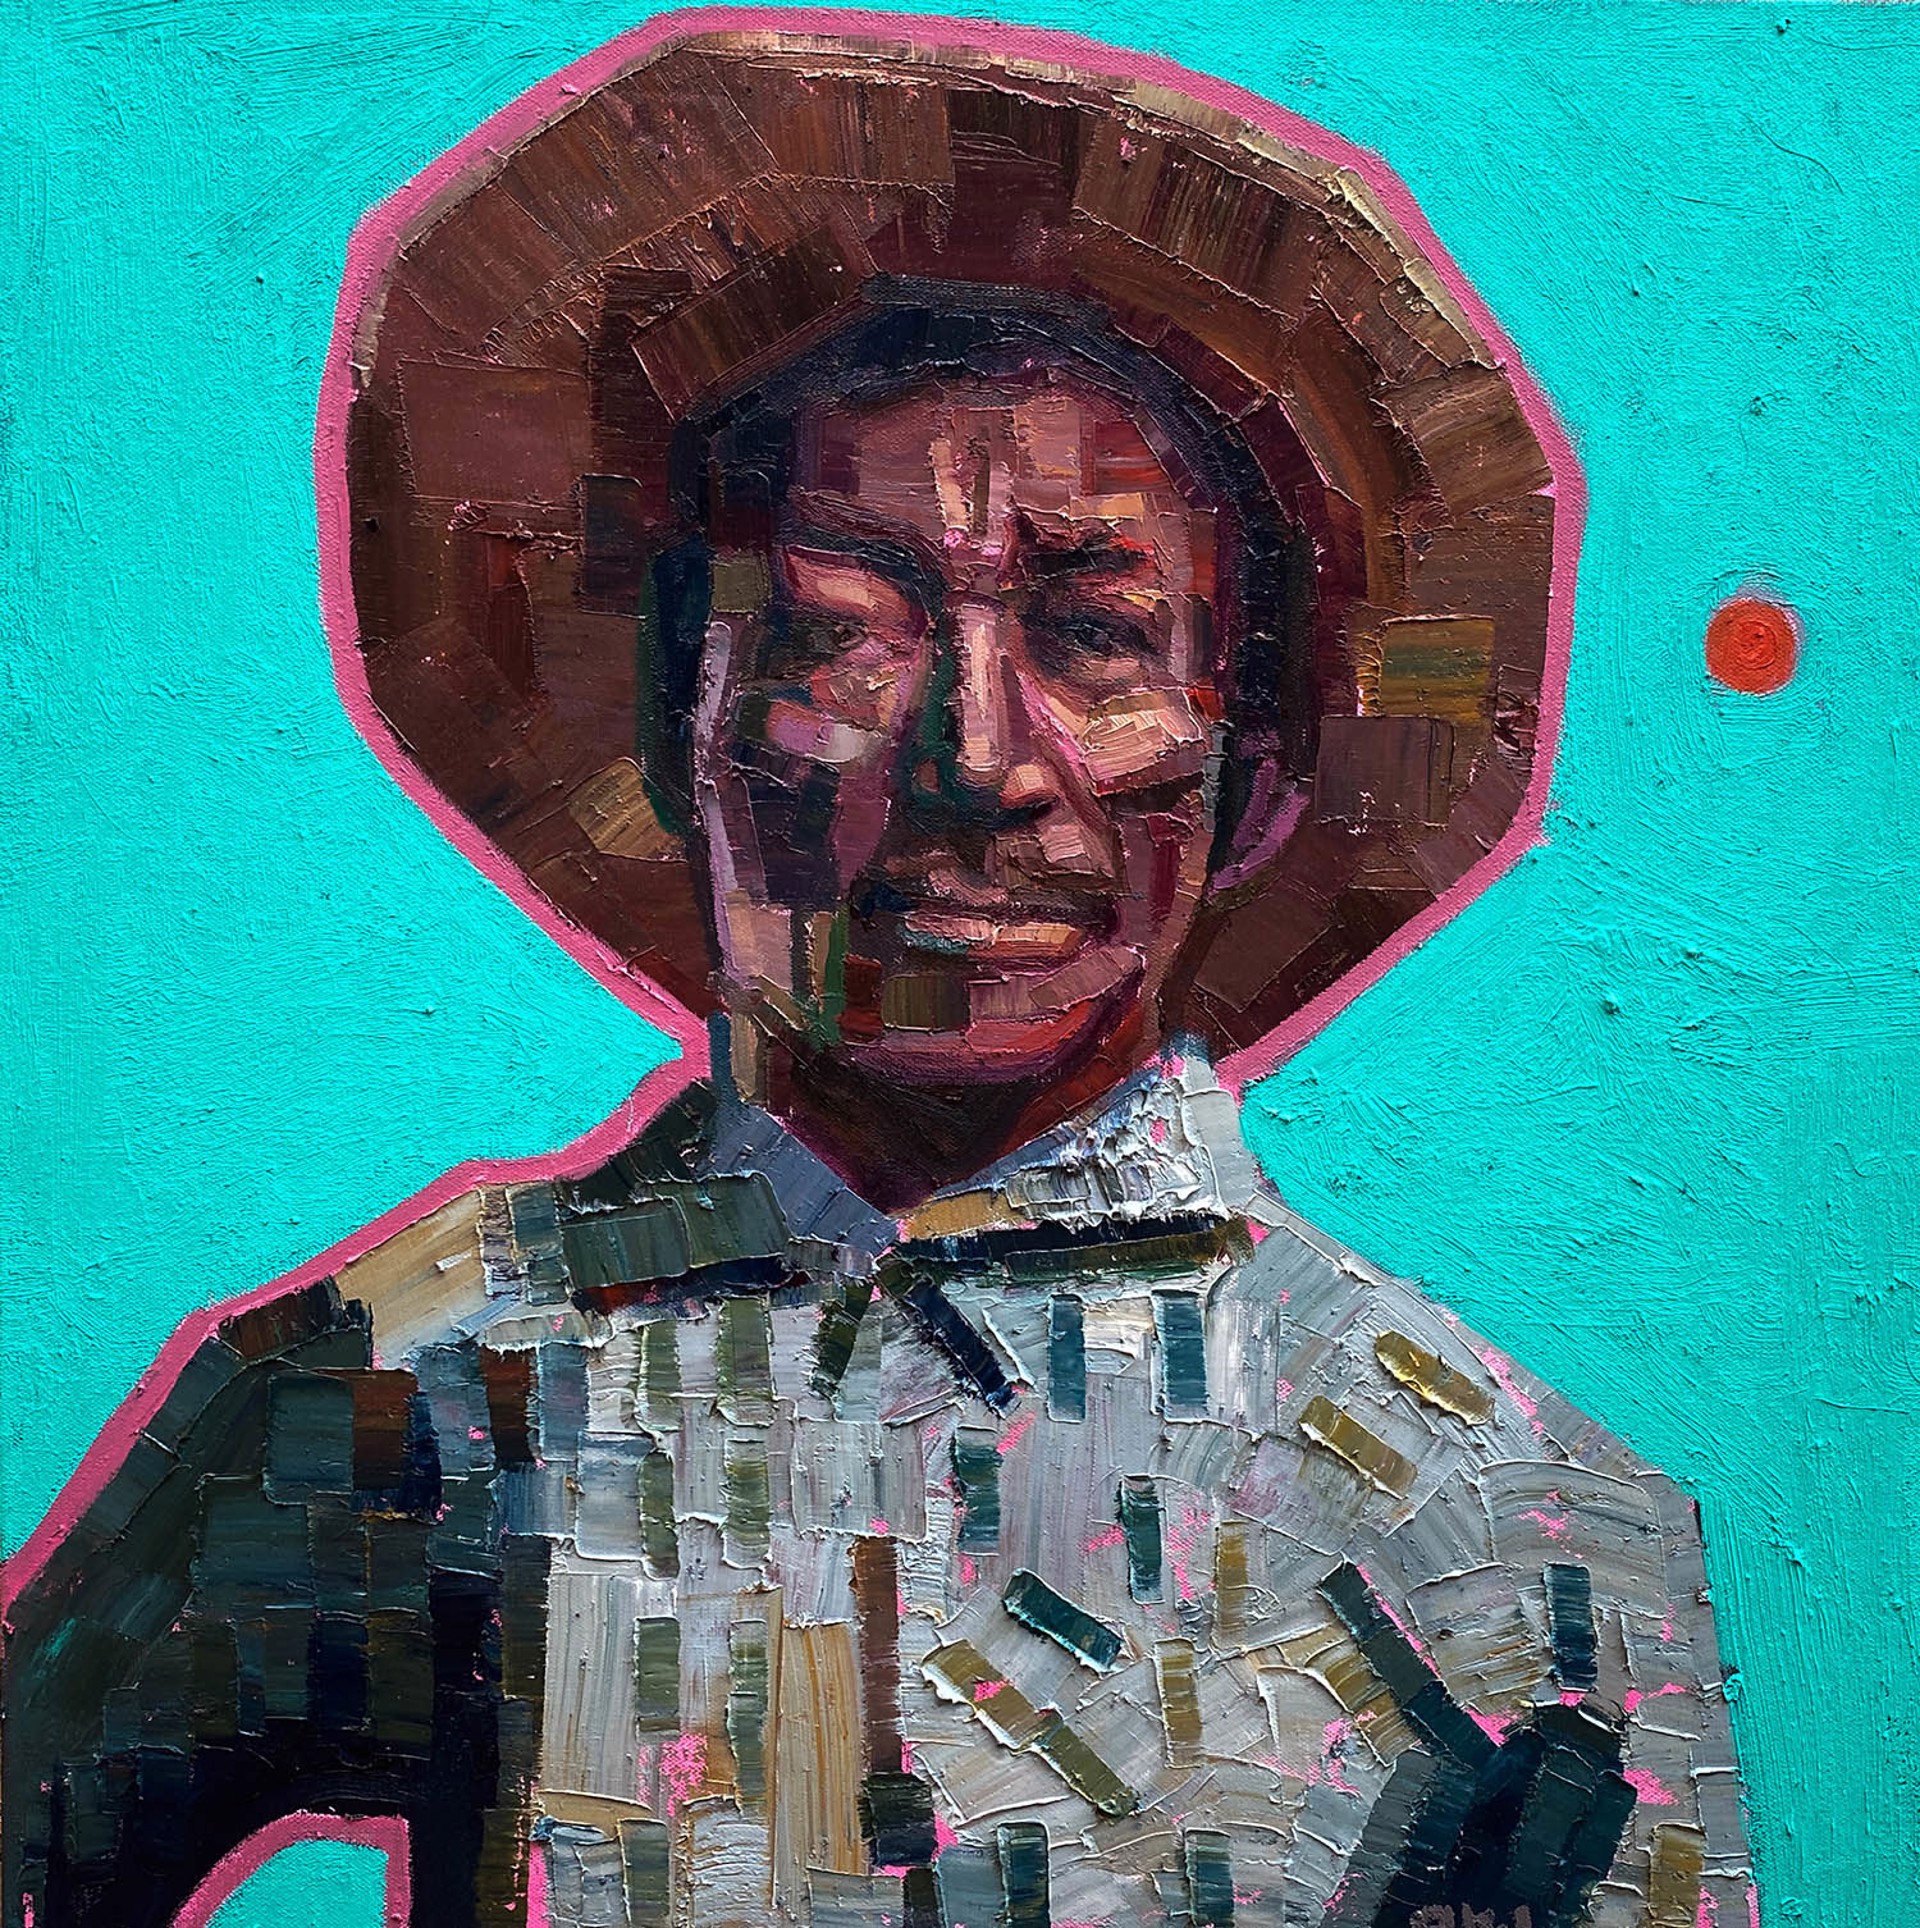 Original Oil Painting By Aaron Hazel Featuring A Portrait Of A Man Over Turquoise Background